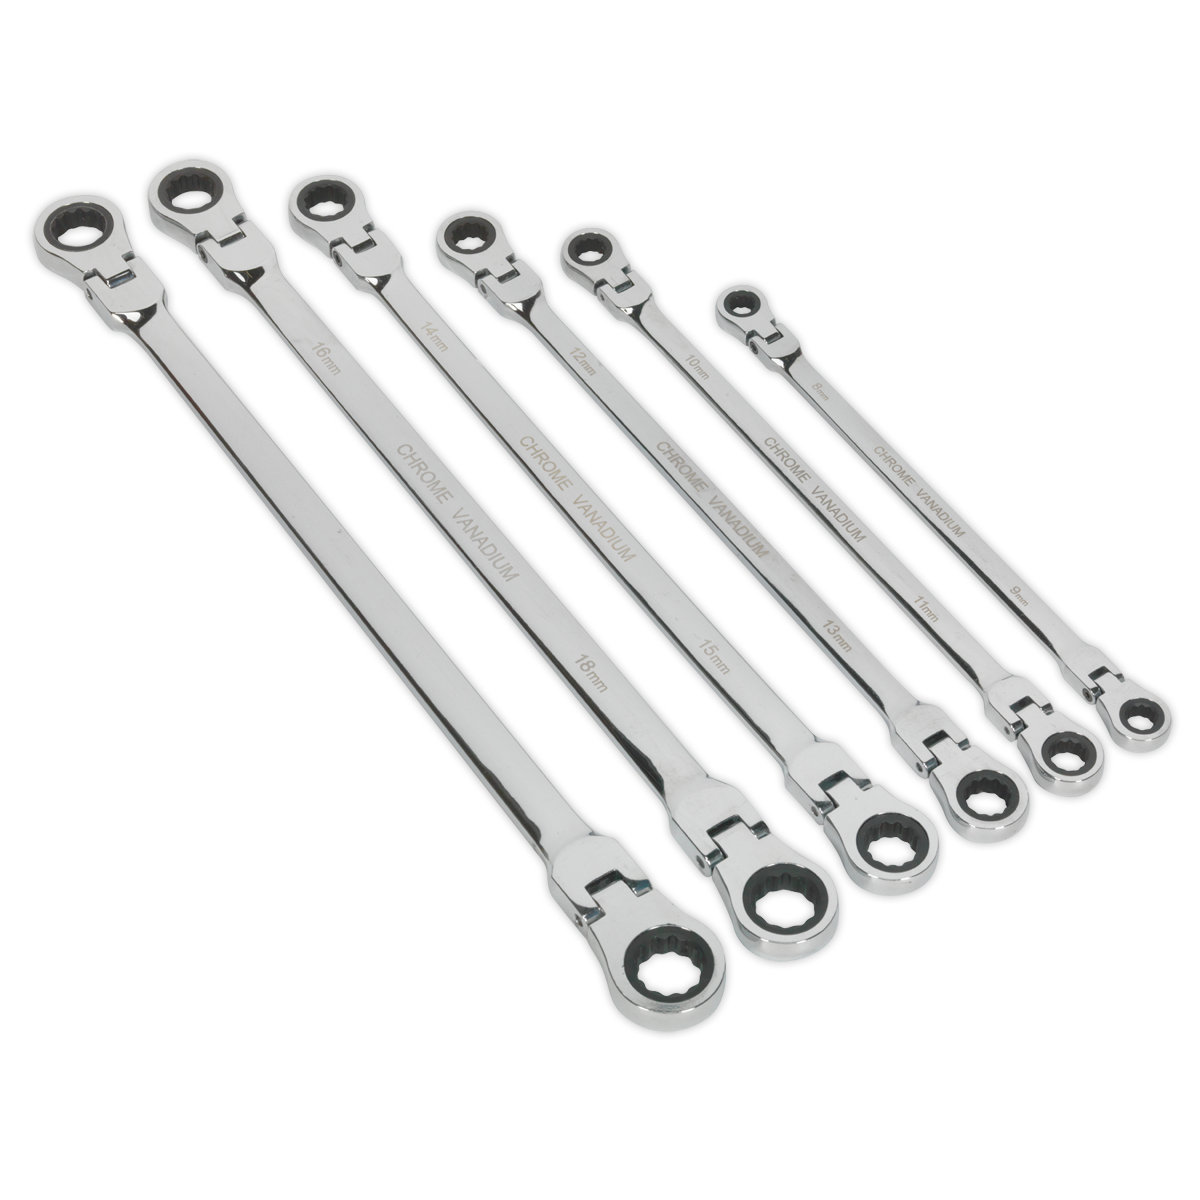 Sealey Flexi-Head Double End Ratchet Ring Spanner Set 6pc Extra-Long Metric